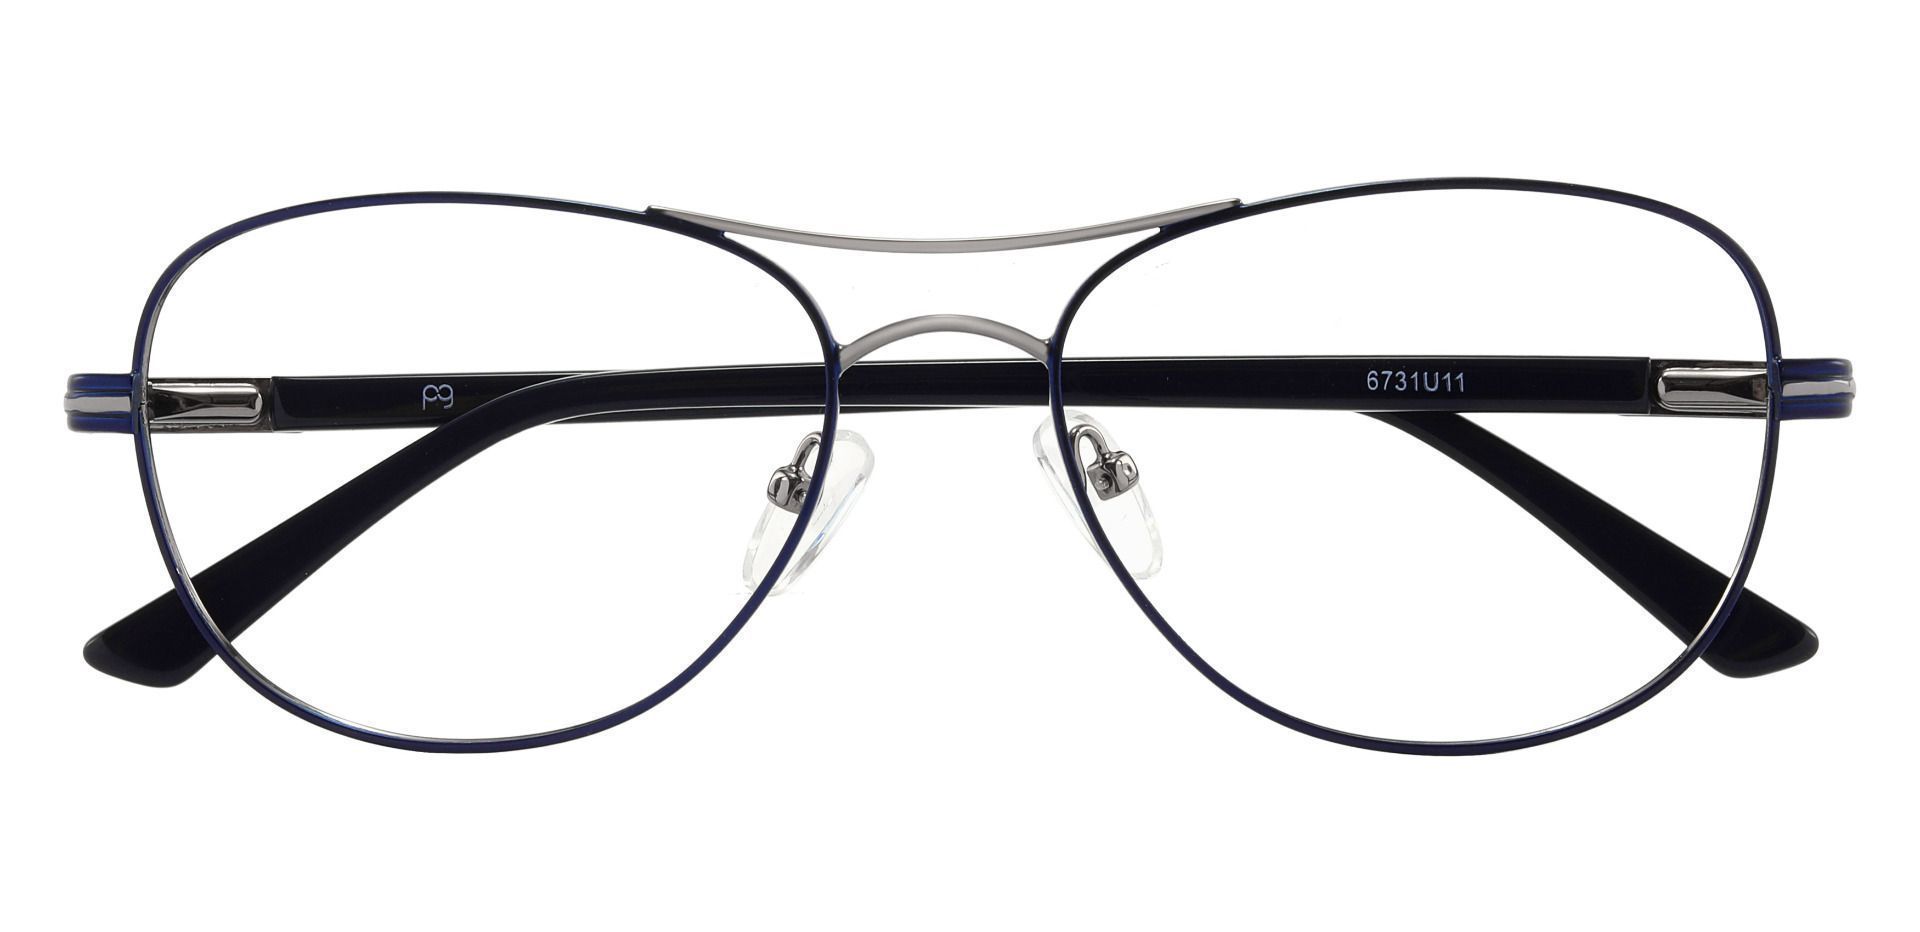 Reeves Aviator Non-Rx Glasses - Blue